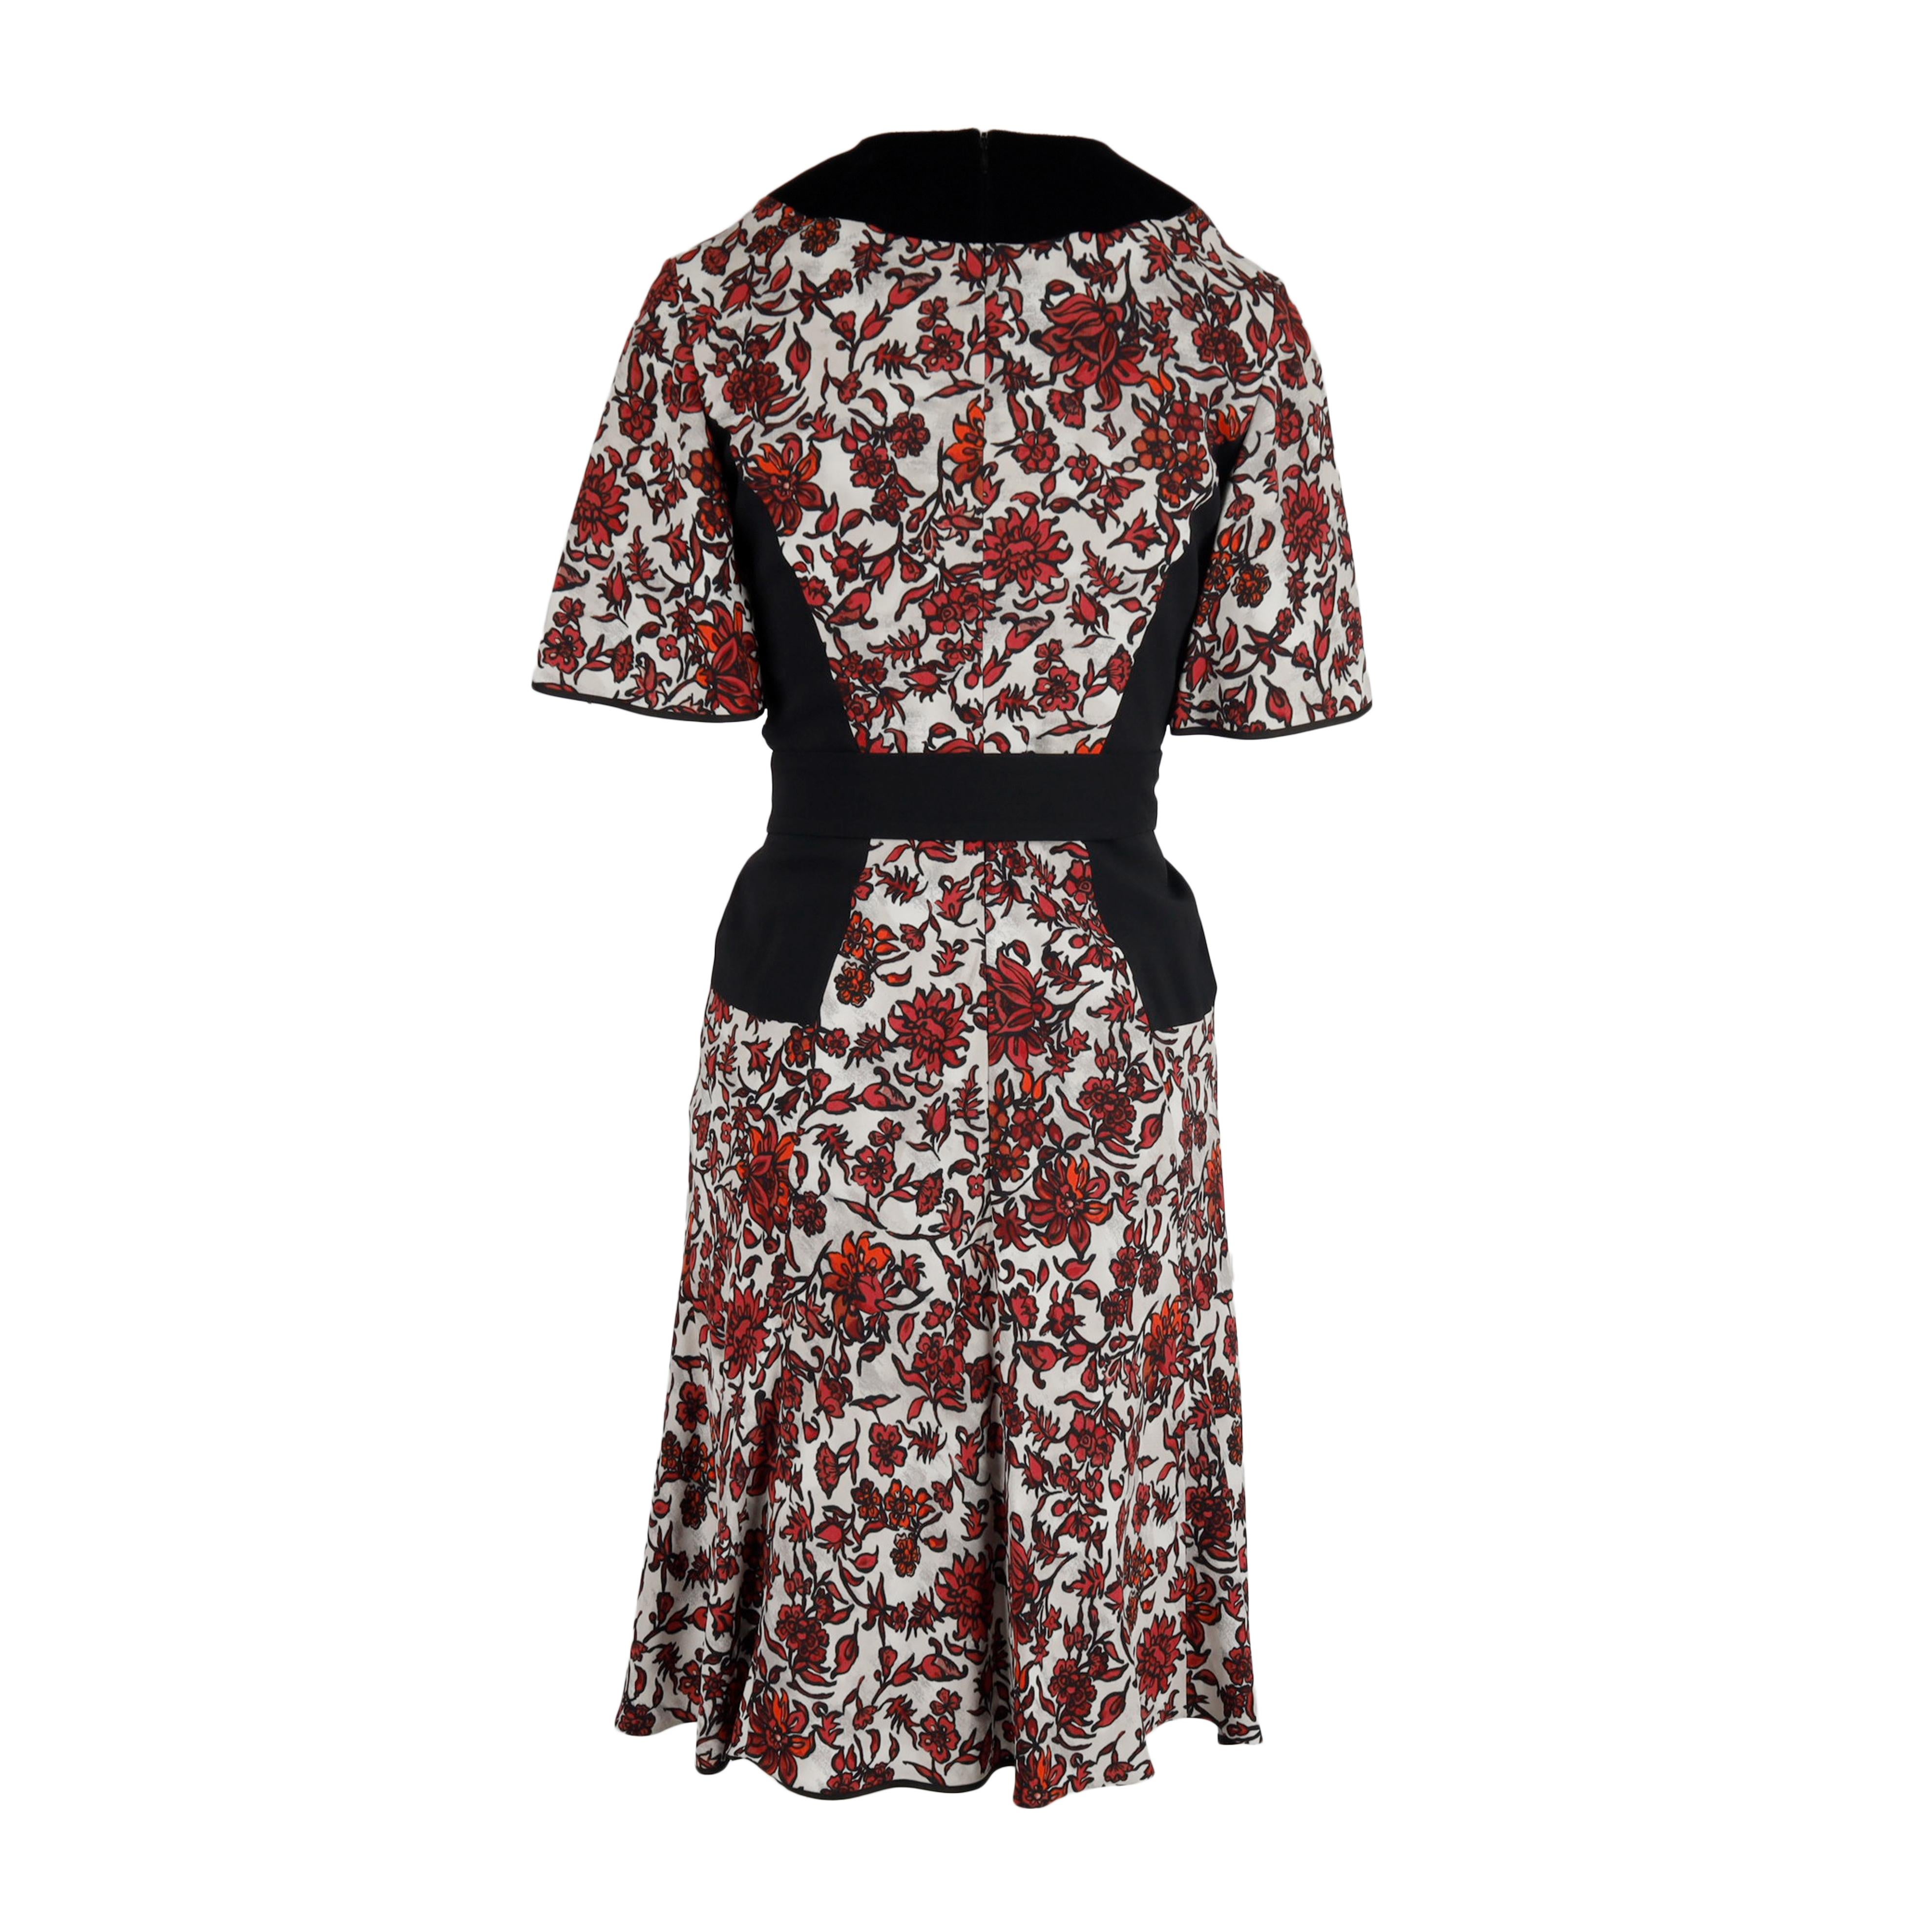 Featuring a bold floral motif in red, black and white, this fit and flare dress makes a statement with a velvet collar, corset-like waist detail, and self-tie bow belt. Further complemented with fluted angel half sleeves and a concealed back zip,